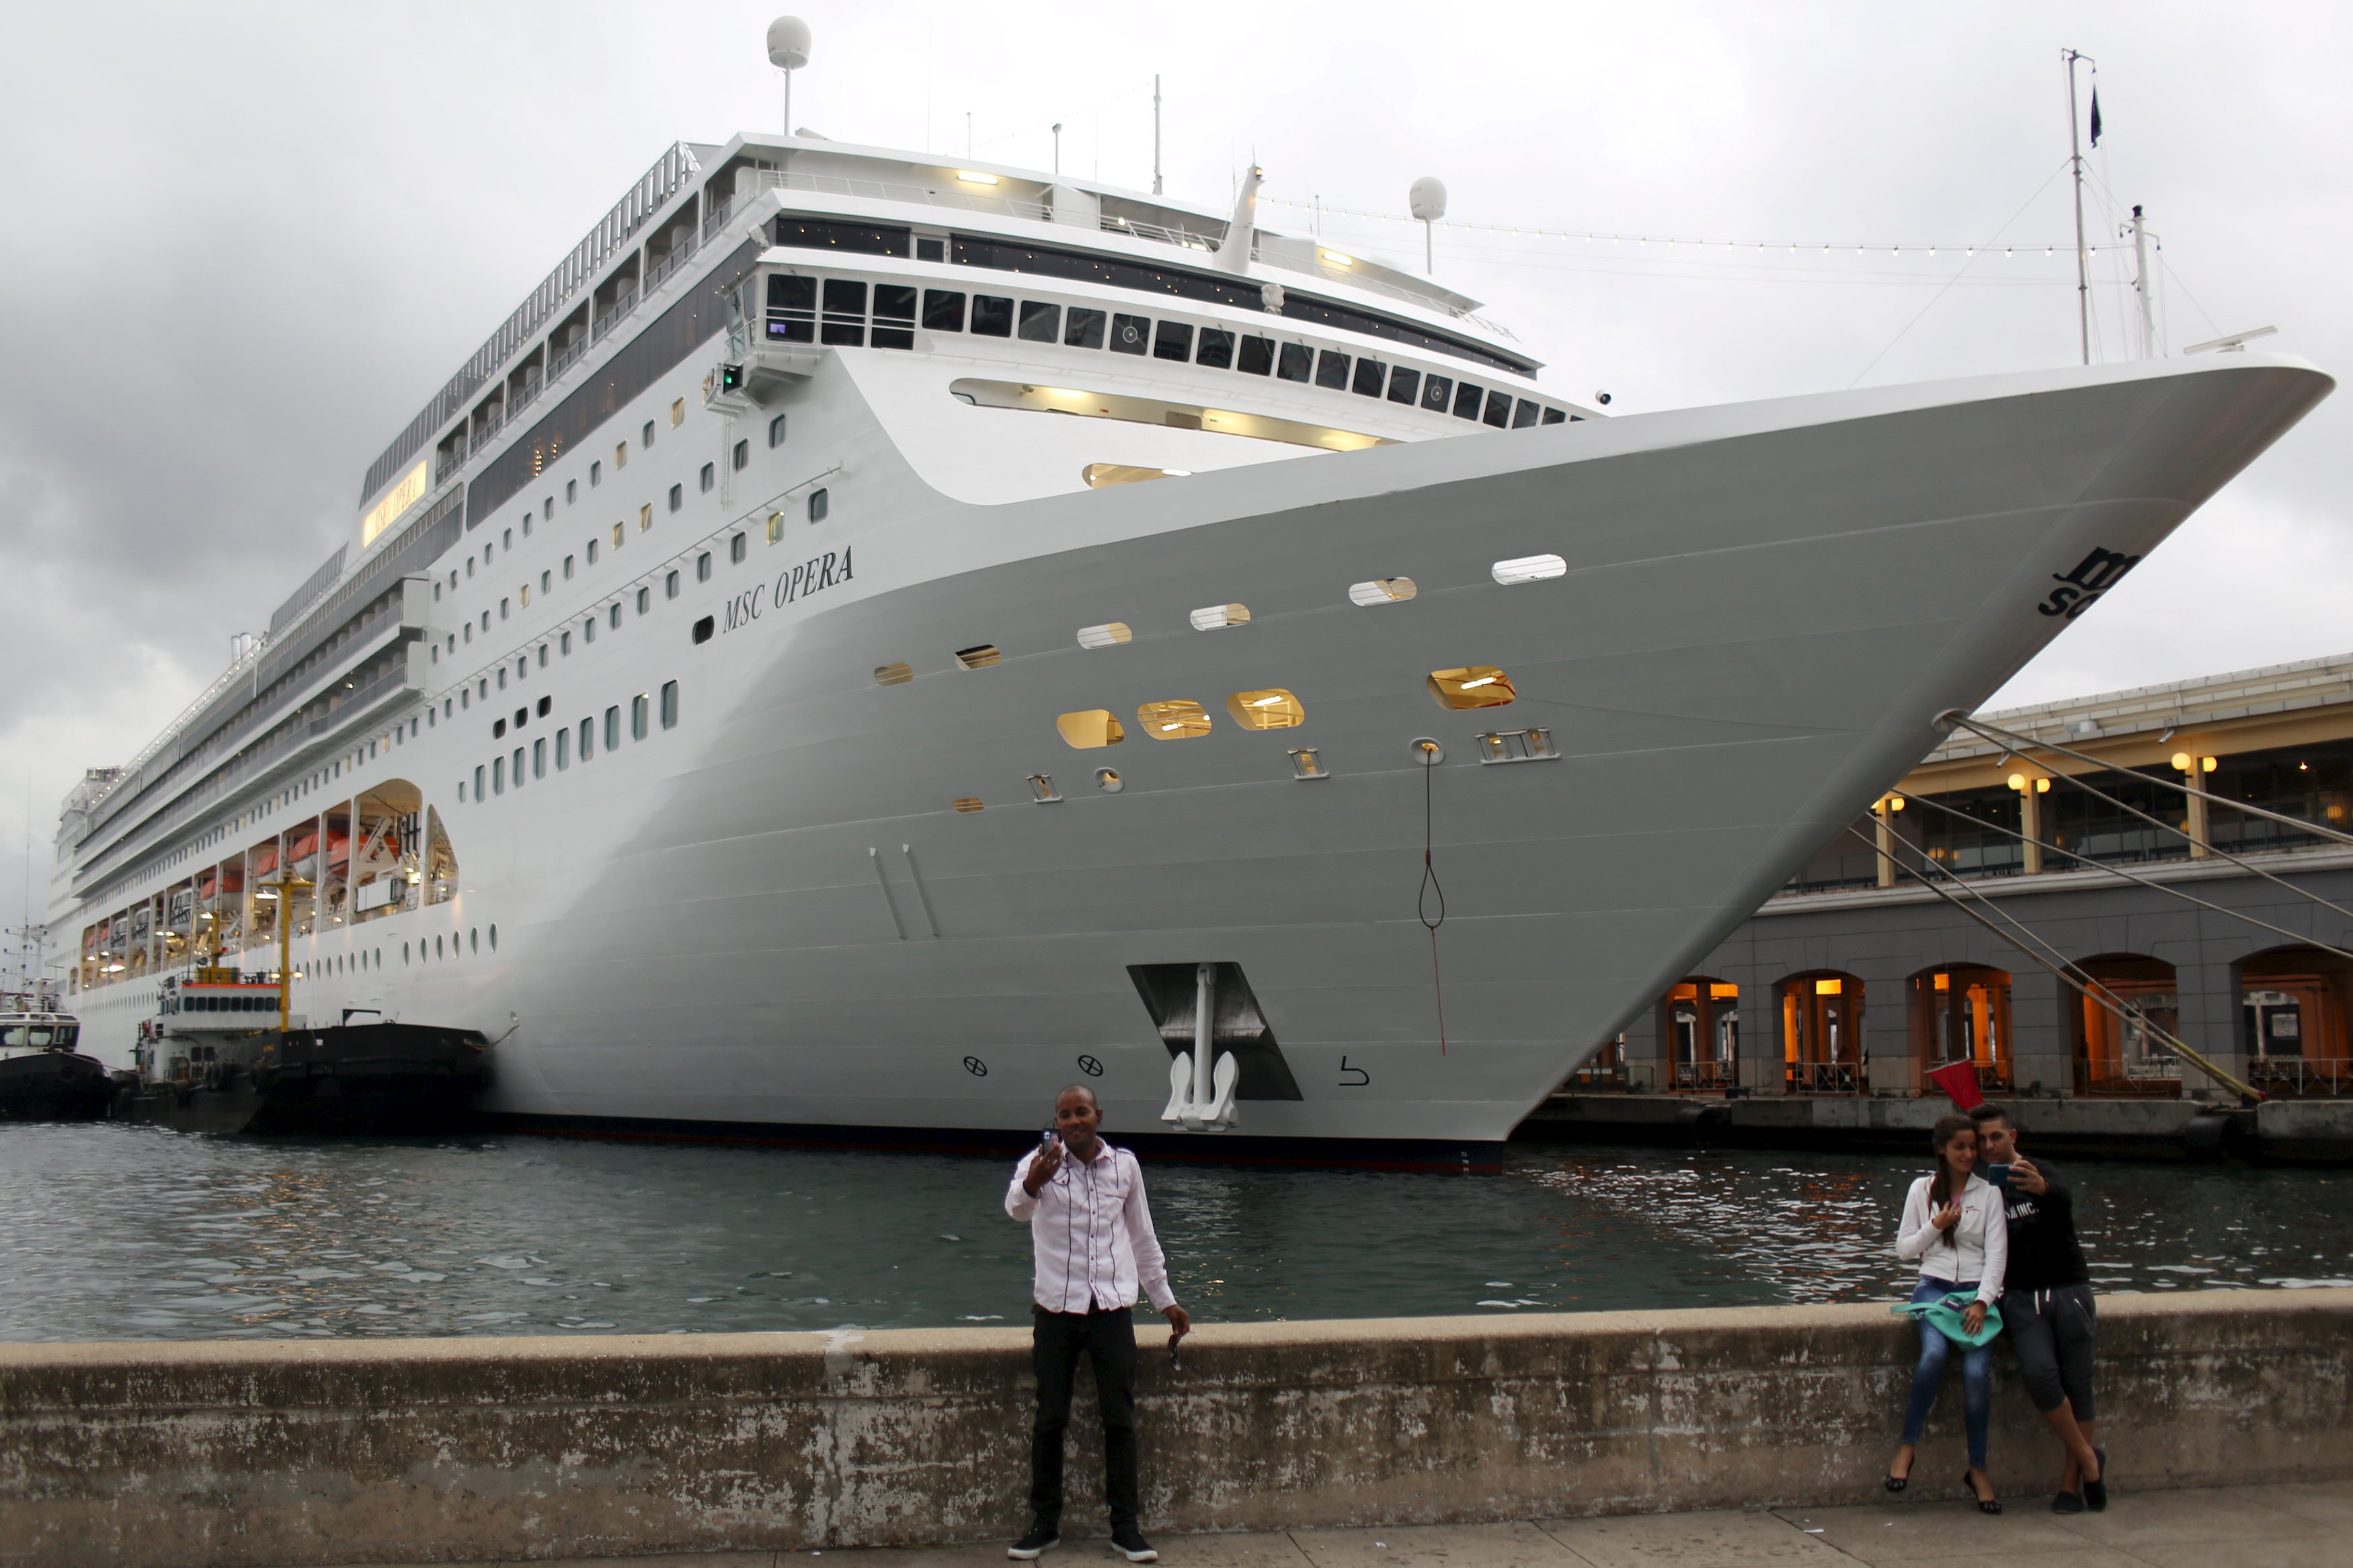 Cuba lifts sea ban for citizens, clears way for historic Carnival voyage